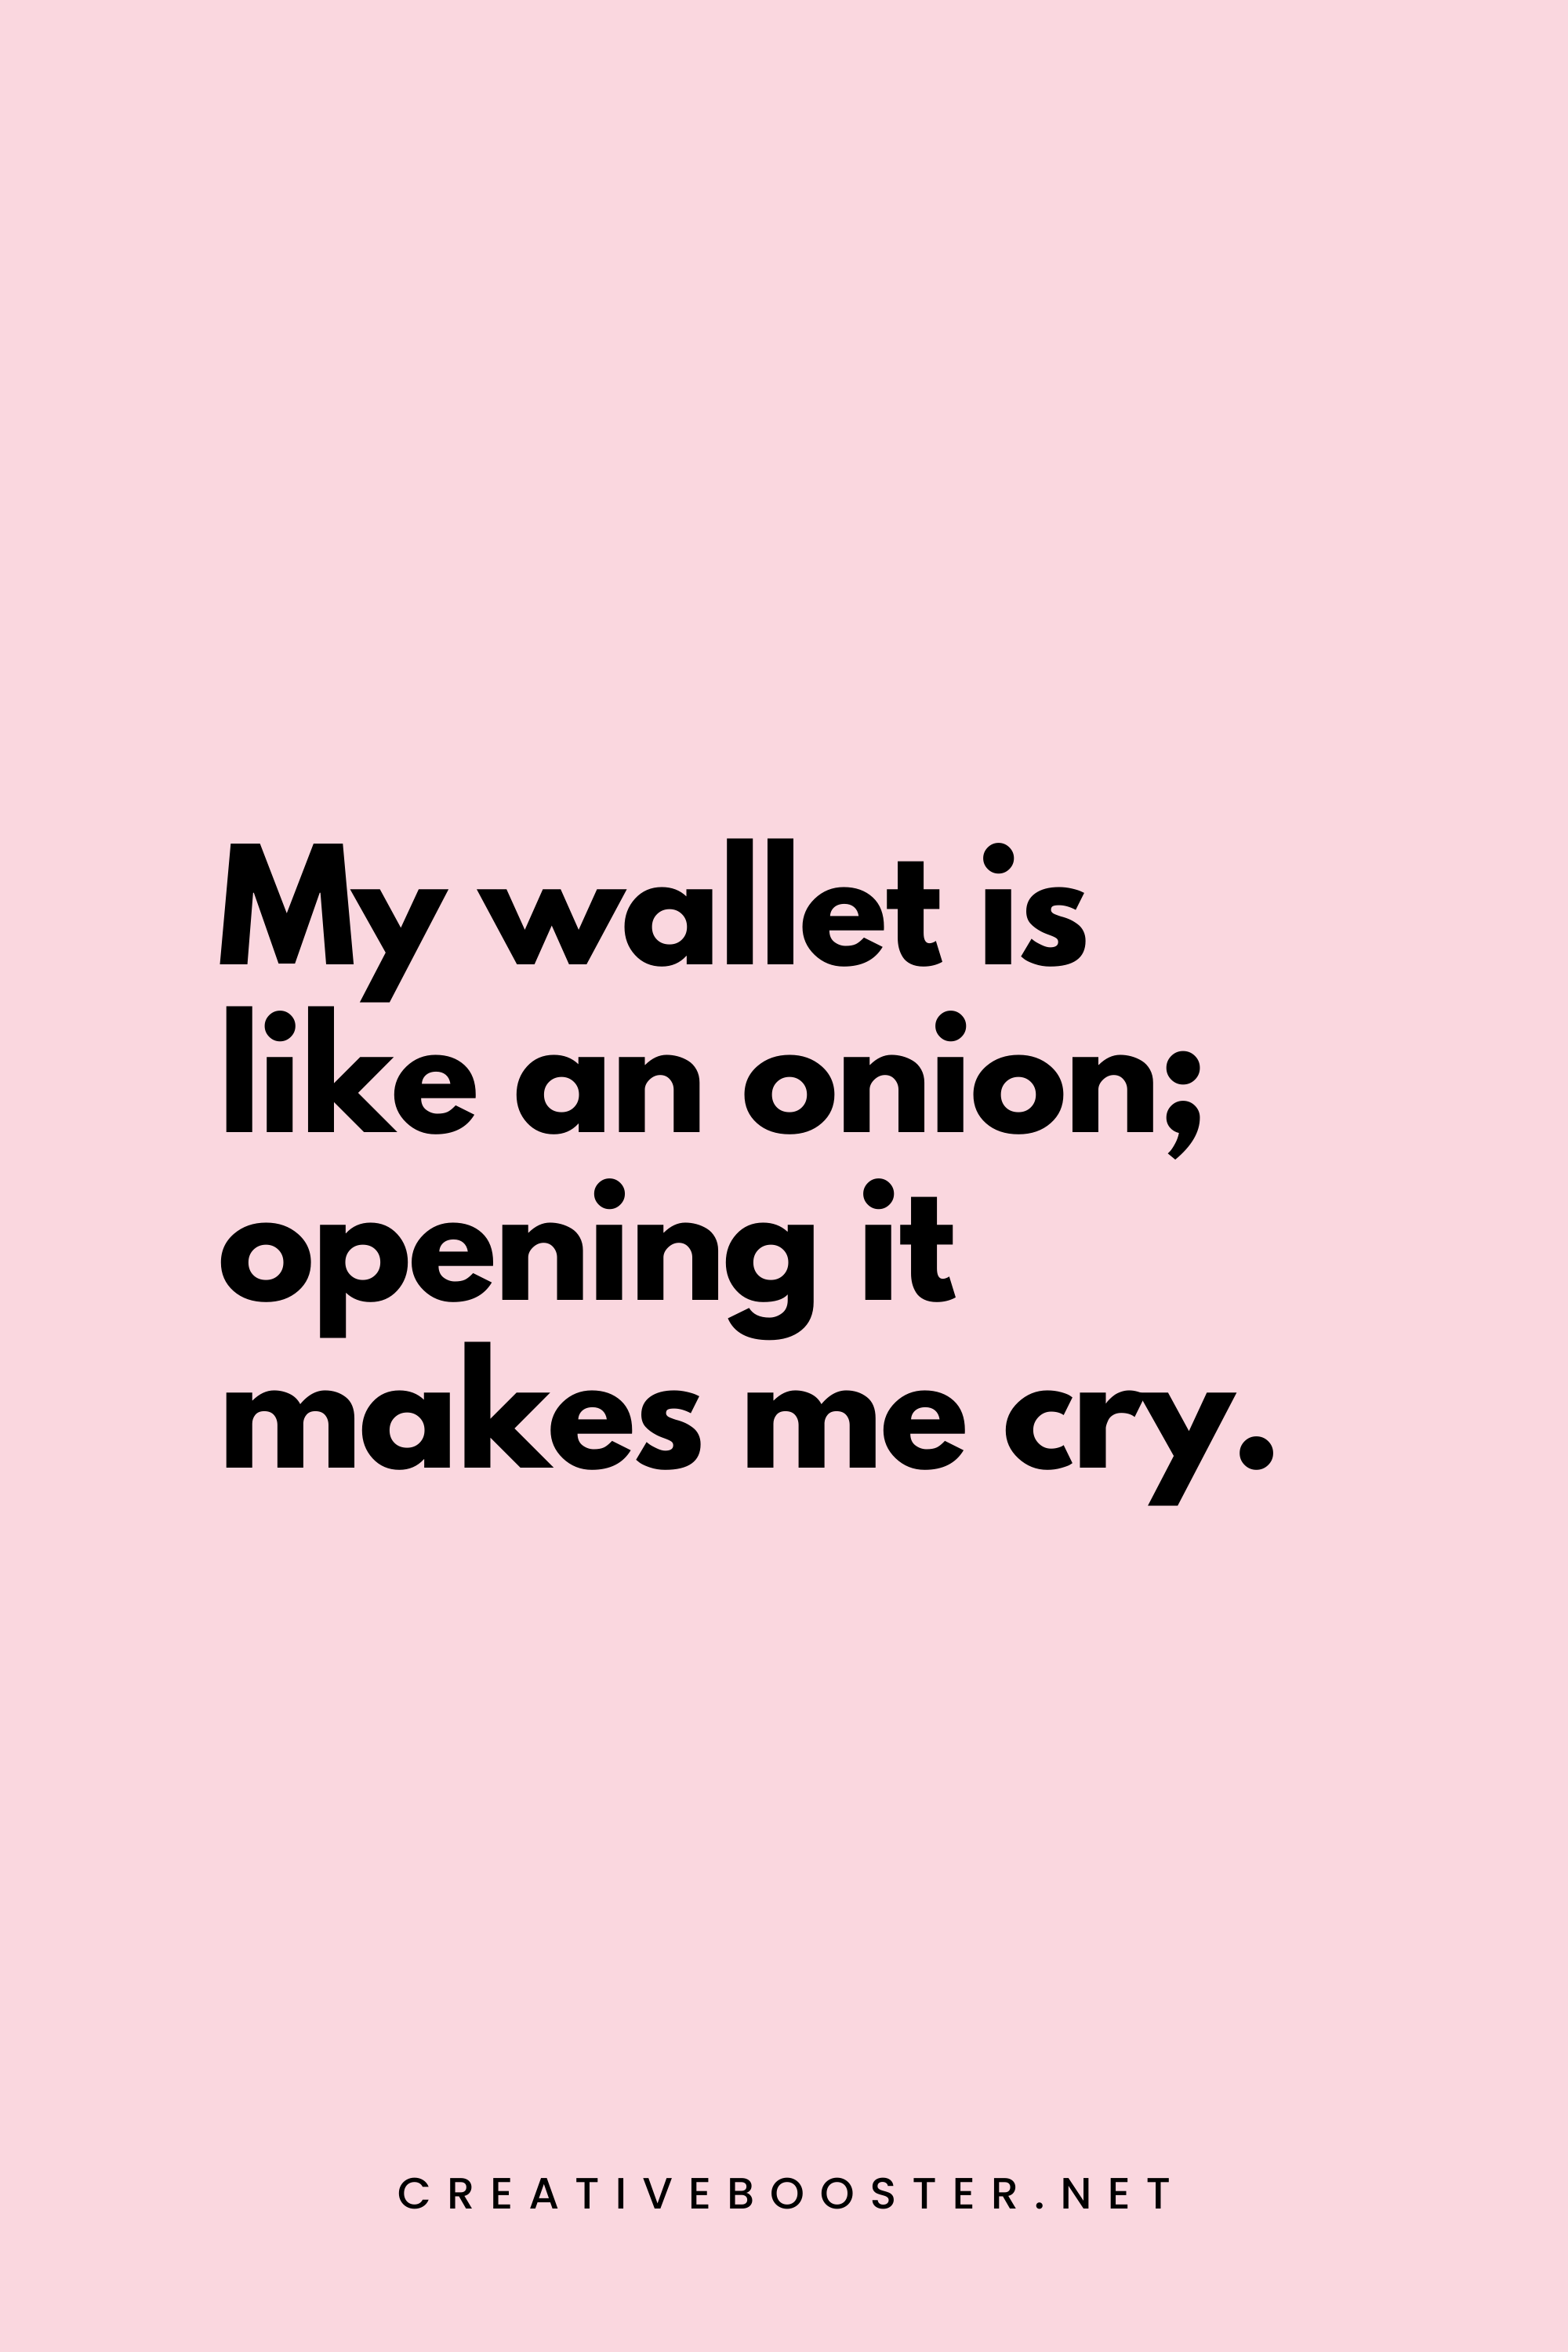 59. My wallet is like an onion; opening it makes me cry. - Creativebooster.net - 6. Funny Financial Freedom Quotes